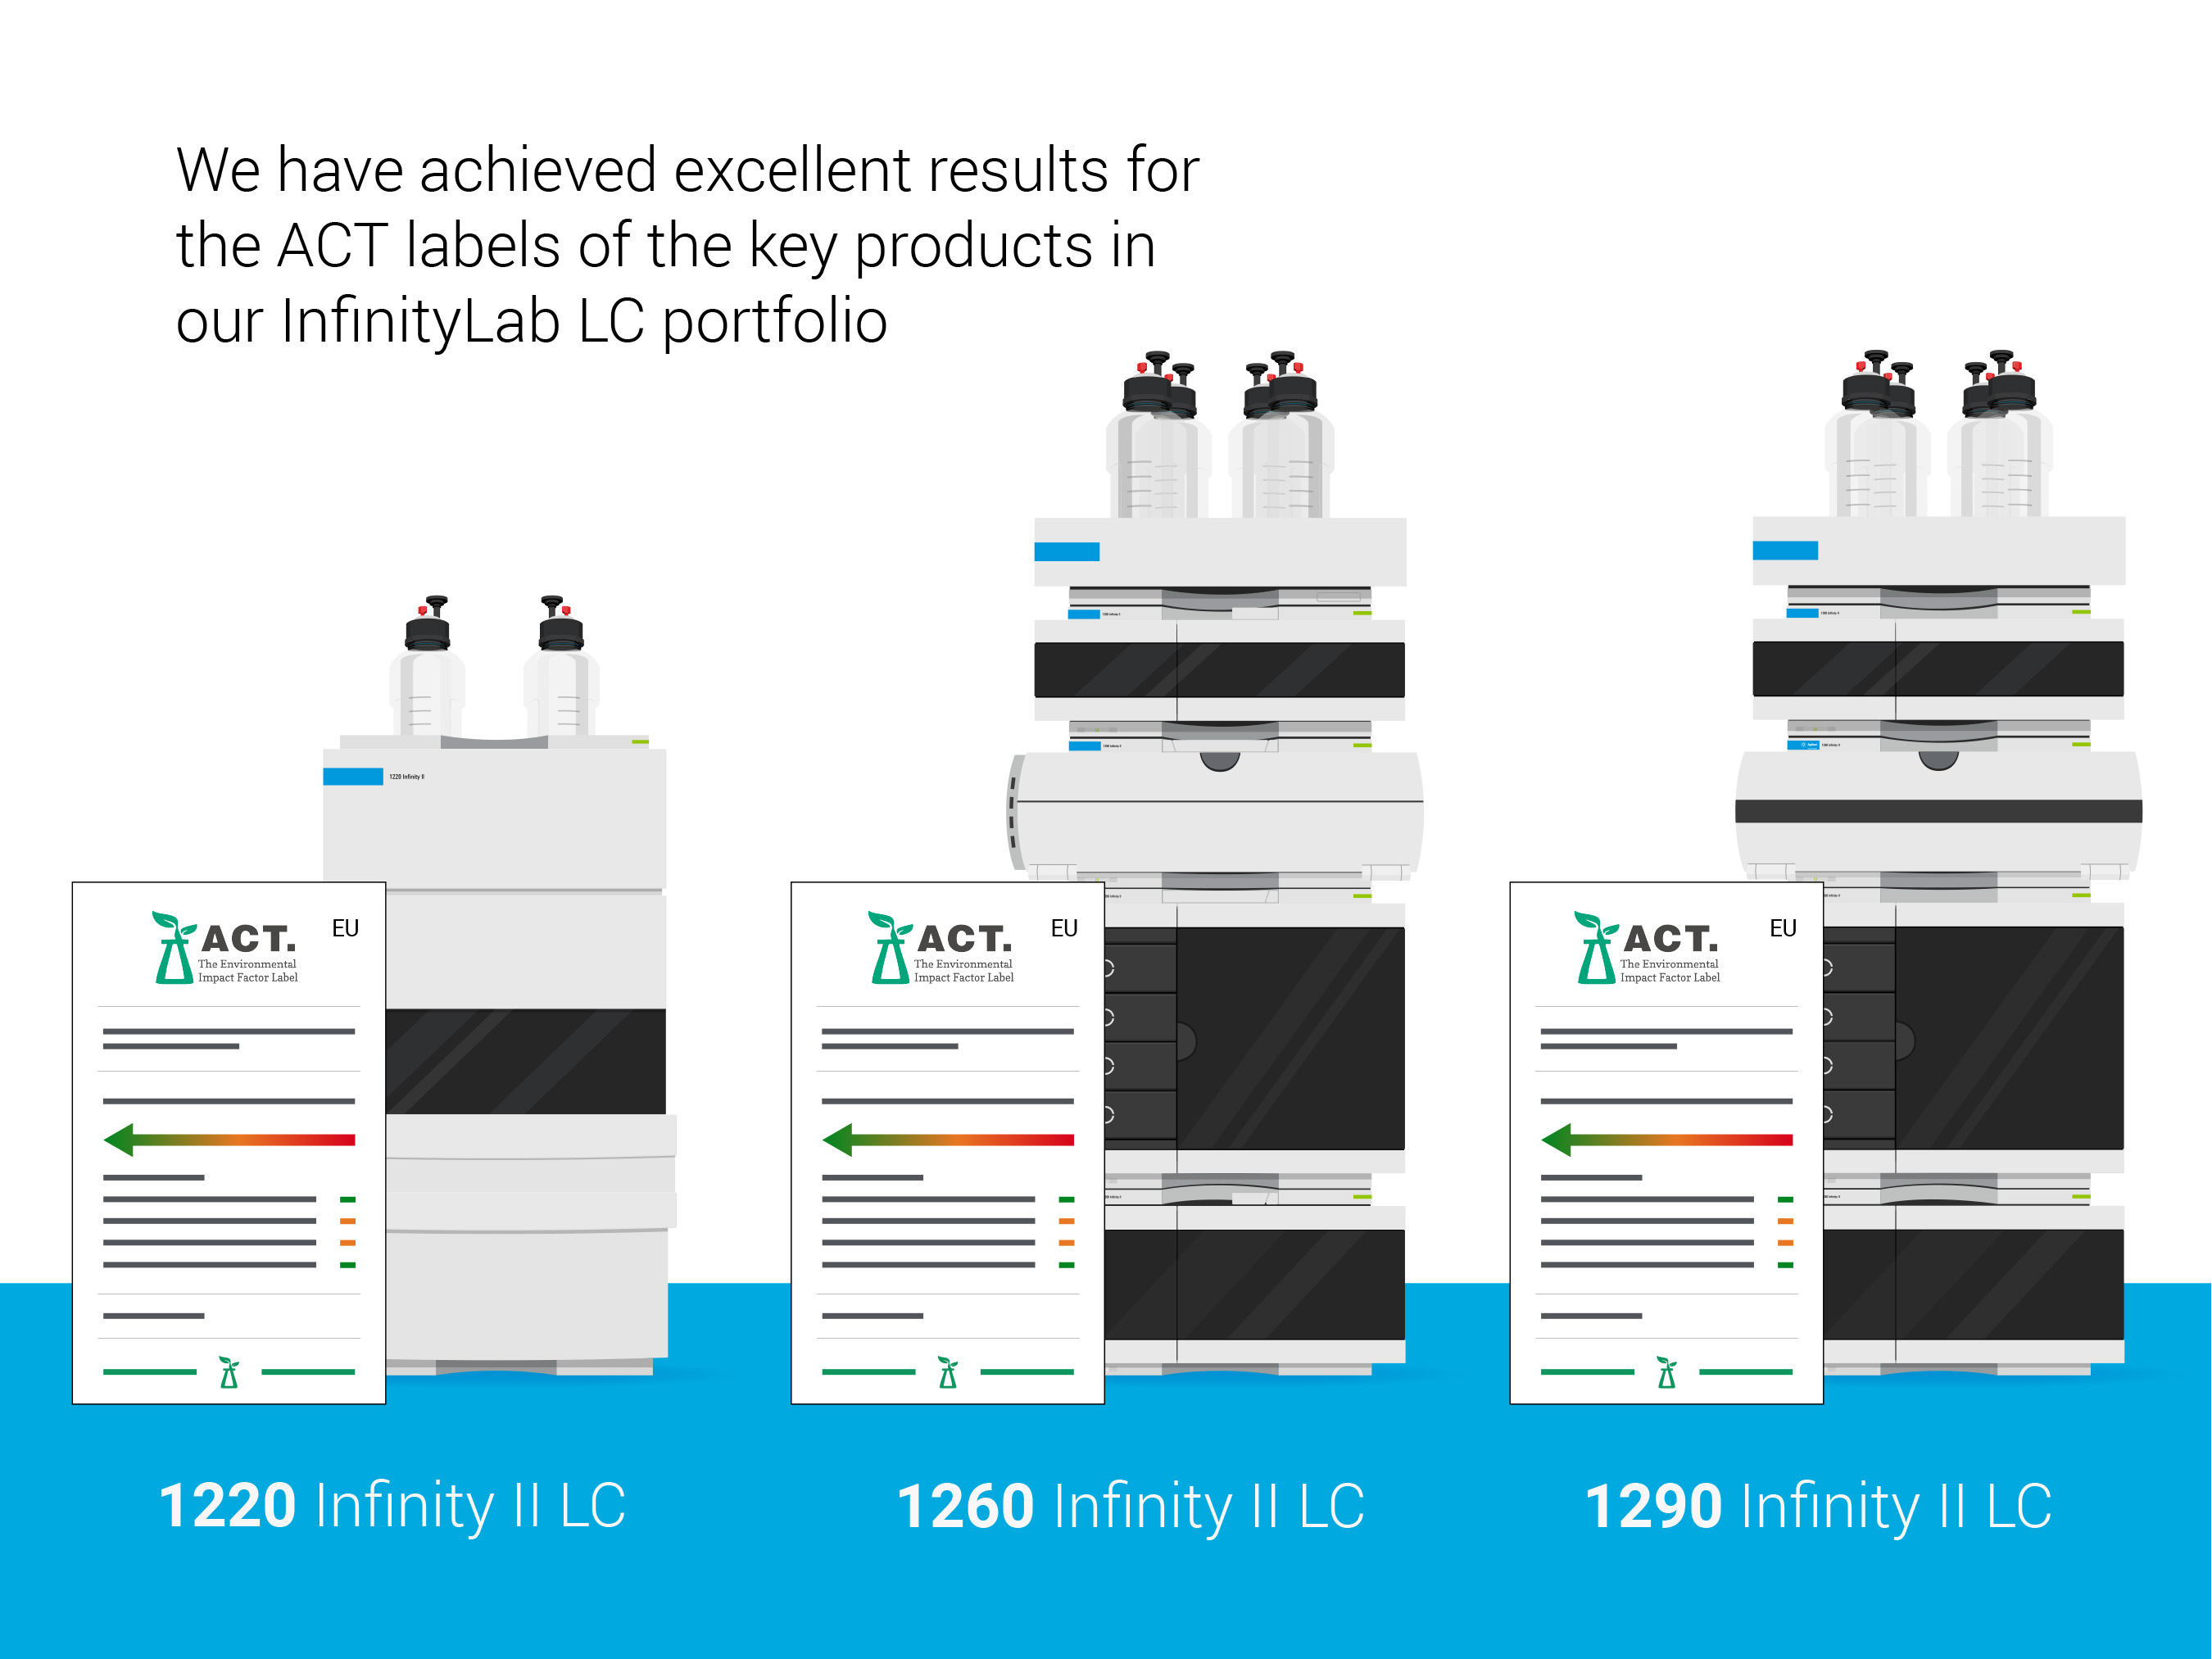 Click here to learn more https://www.agilent.com/en/product/liquid-chromatography/hplc-systems/analytical-hplc-systems/1290-infinity-ii-lc-system